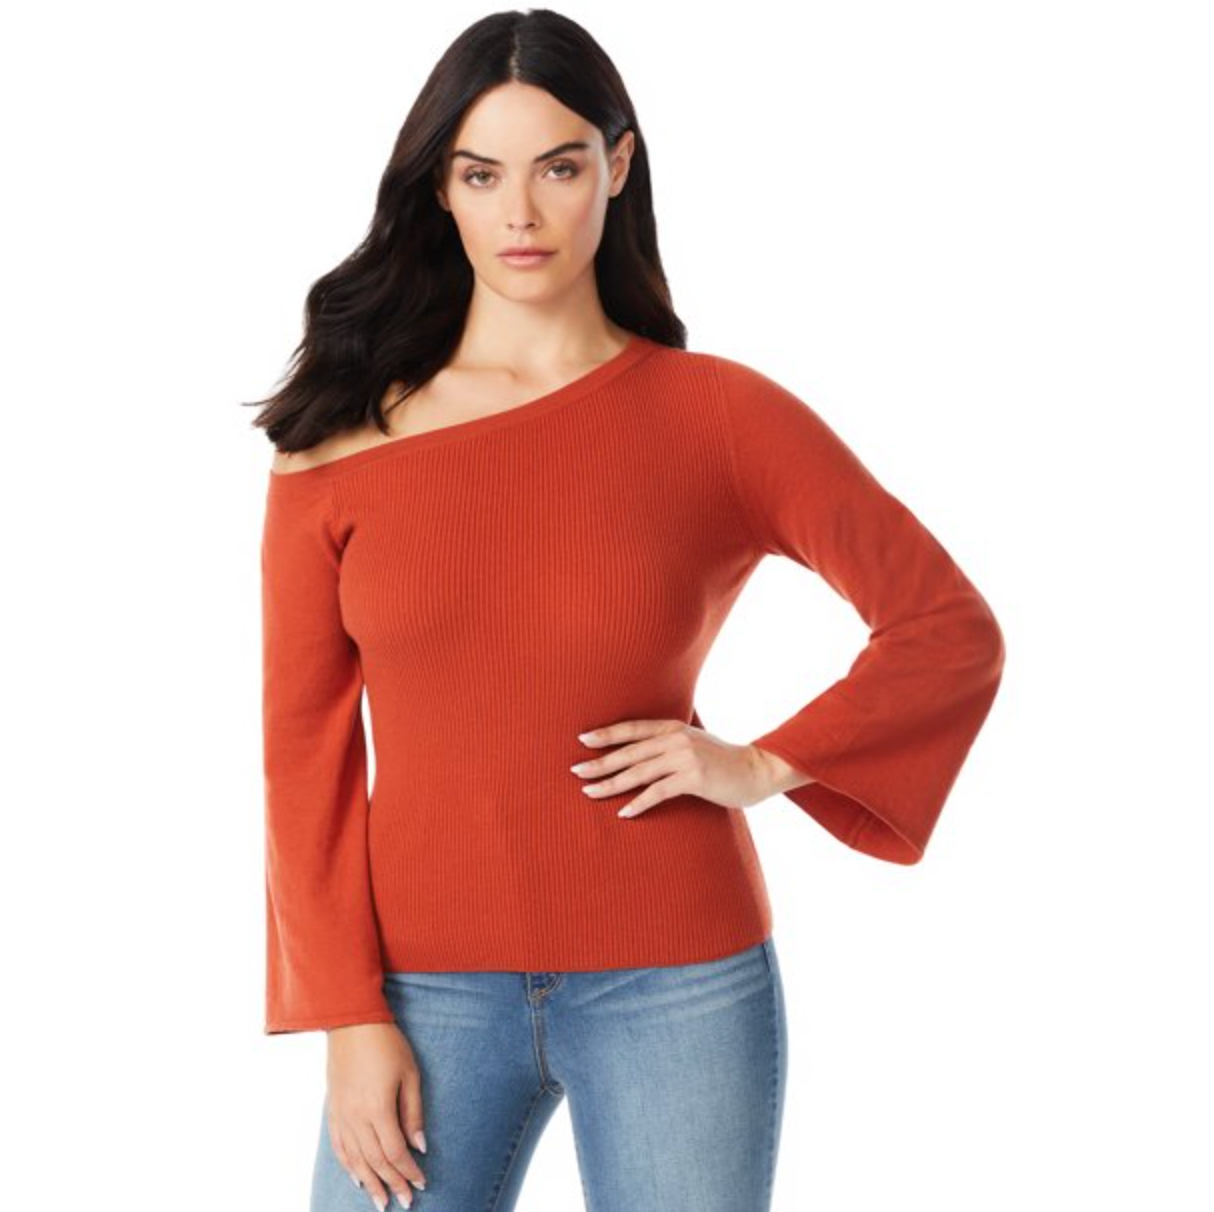 Sofia Jeans by Sofia Vergara Women's One-Shoulder Pullover Sweater